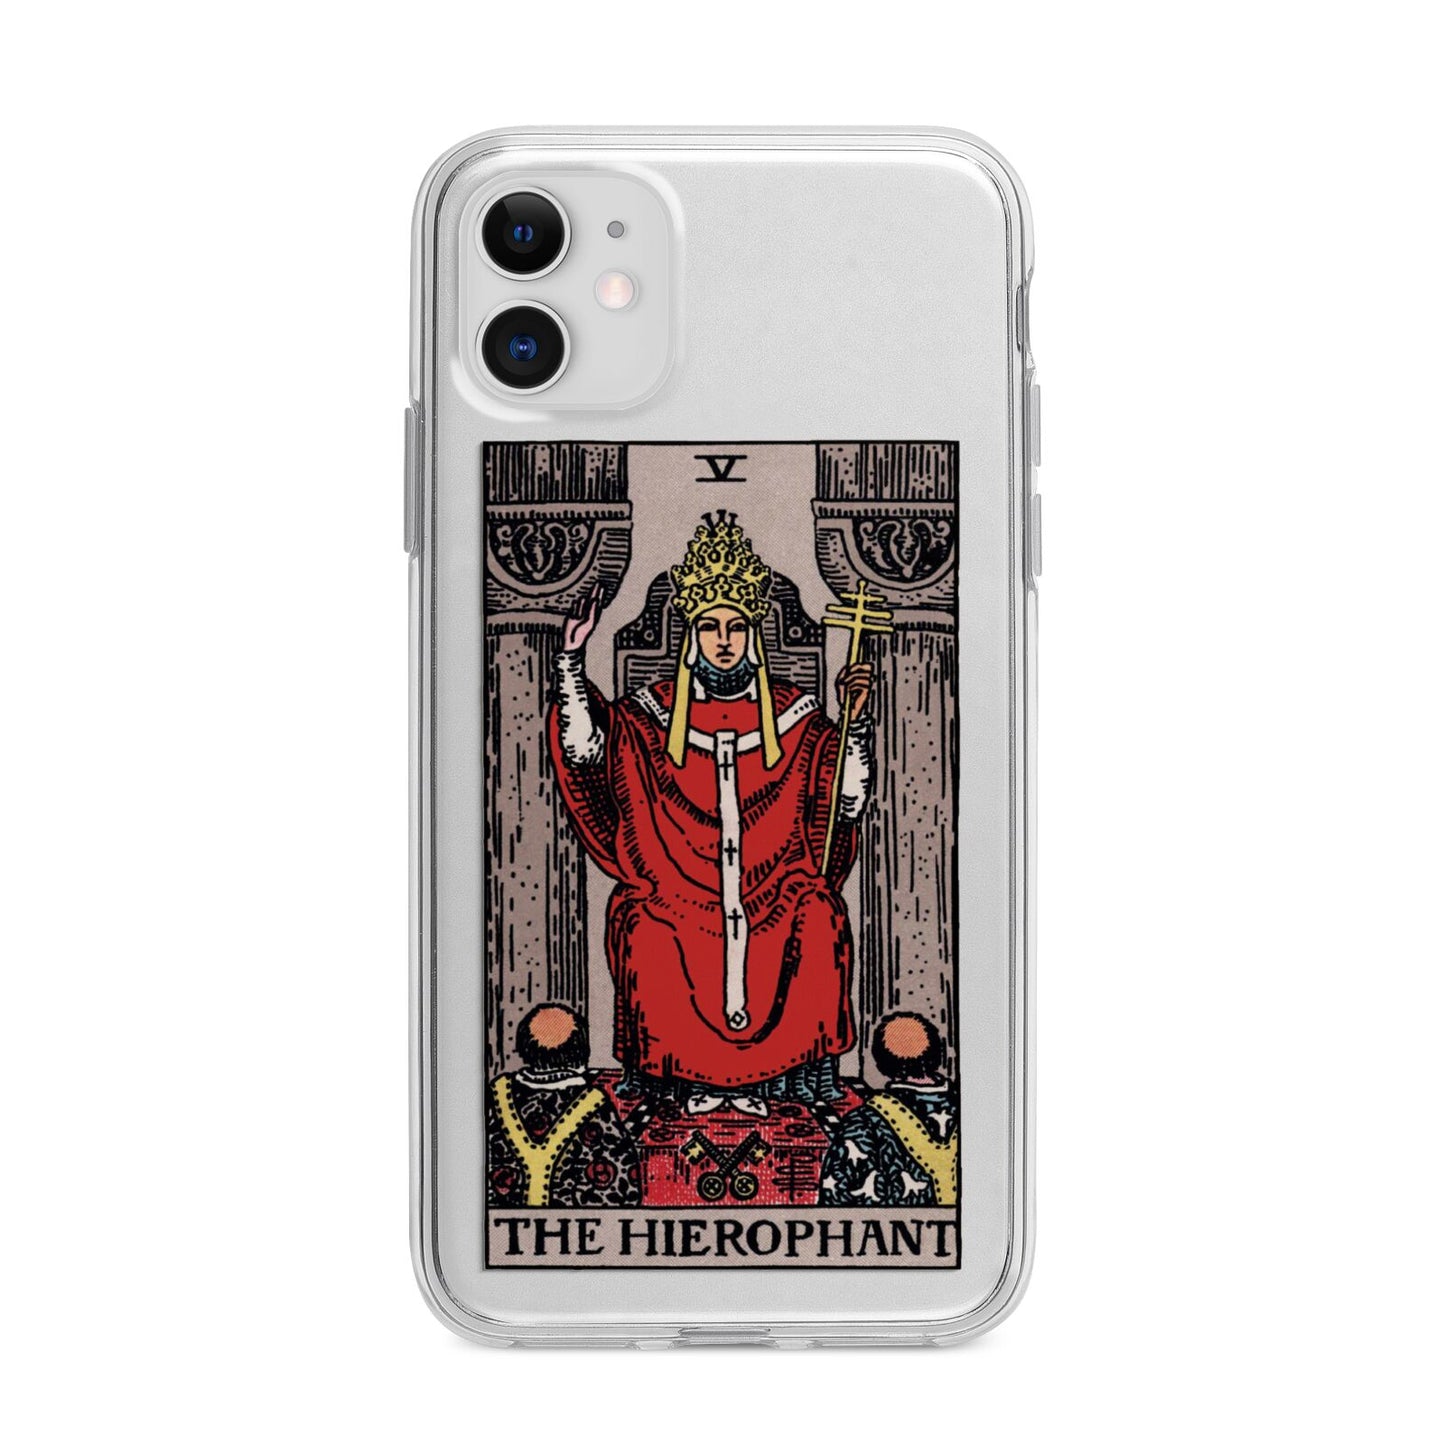 The Hierophant Tarot Card Apple iPhone 11 in White with Bumper Case